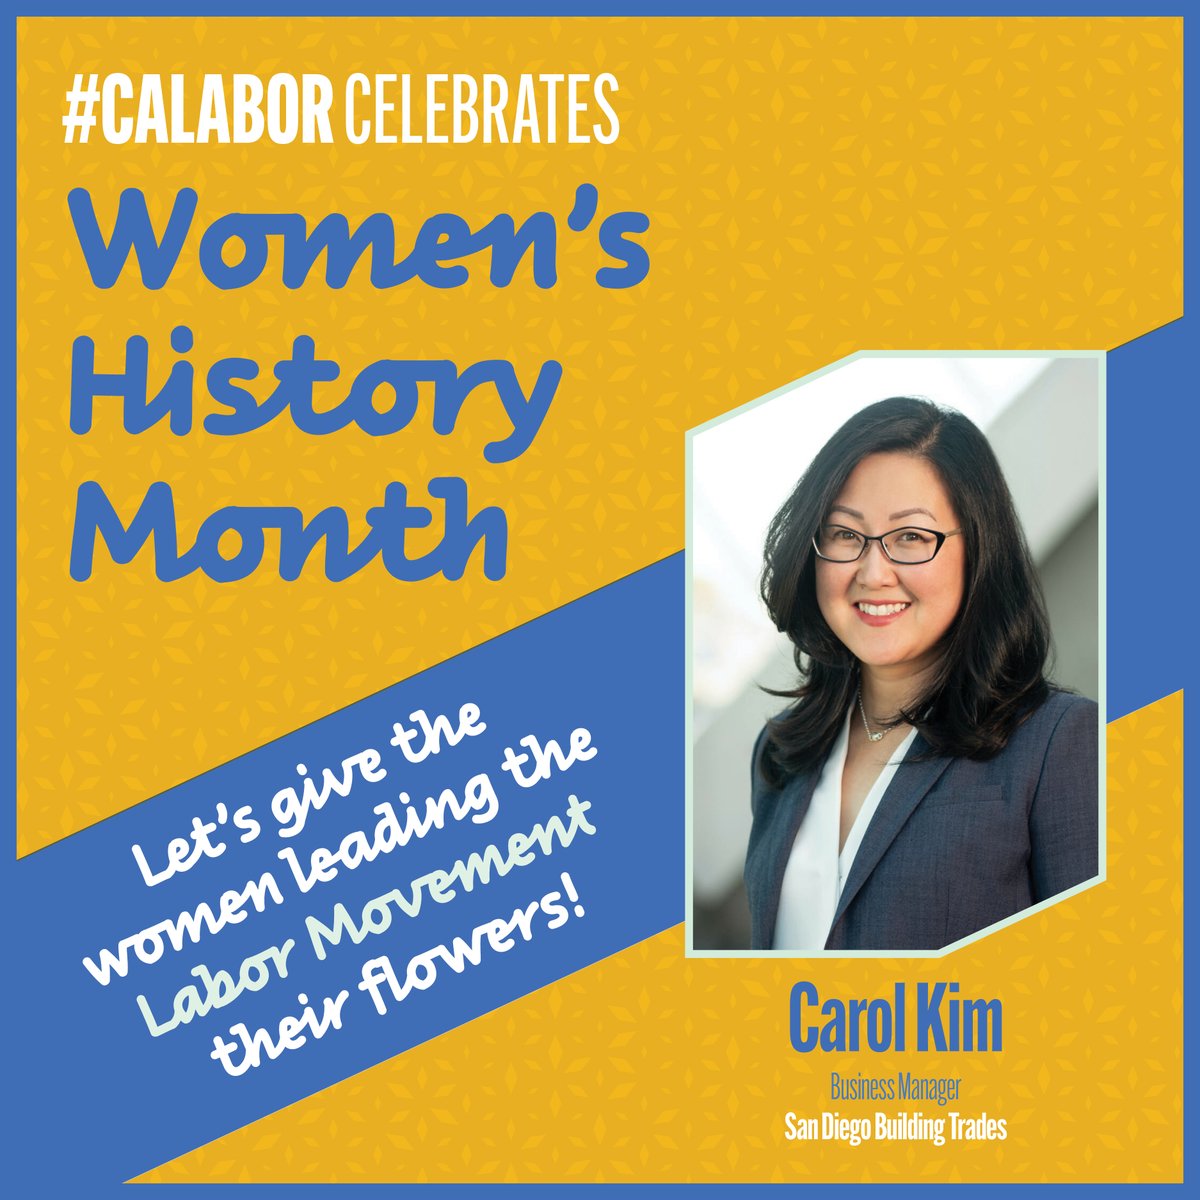 Breaking barriers + building the future we deserve is what Carol Kim is all about. A history-maker + a trailblazer. Carol's leadership in her union + in construction, make our movement + Golden State stronger. #WomensHistoryMonth #WomeninConstructionWeek #InternationalWomensDay